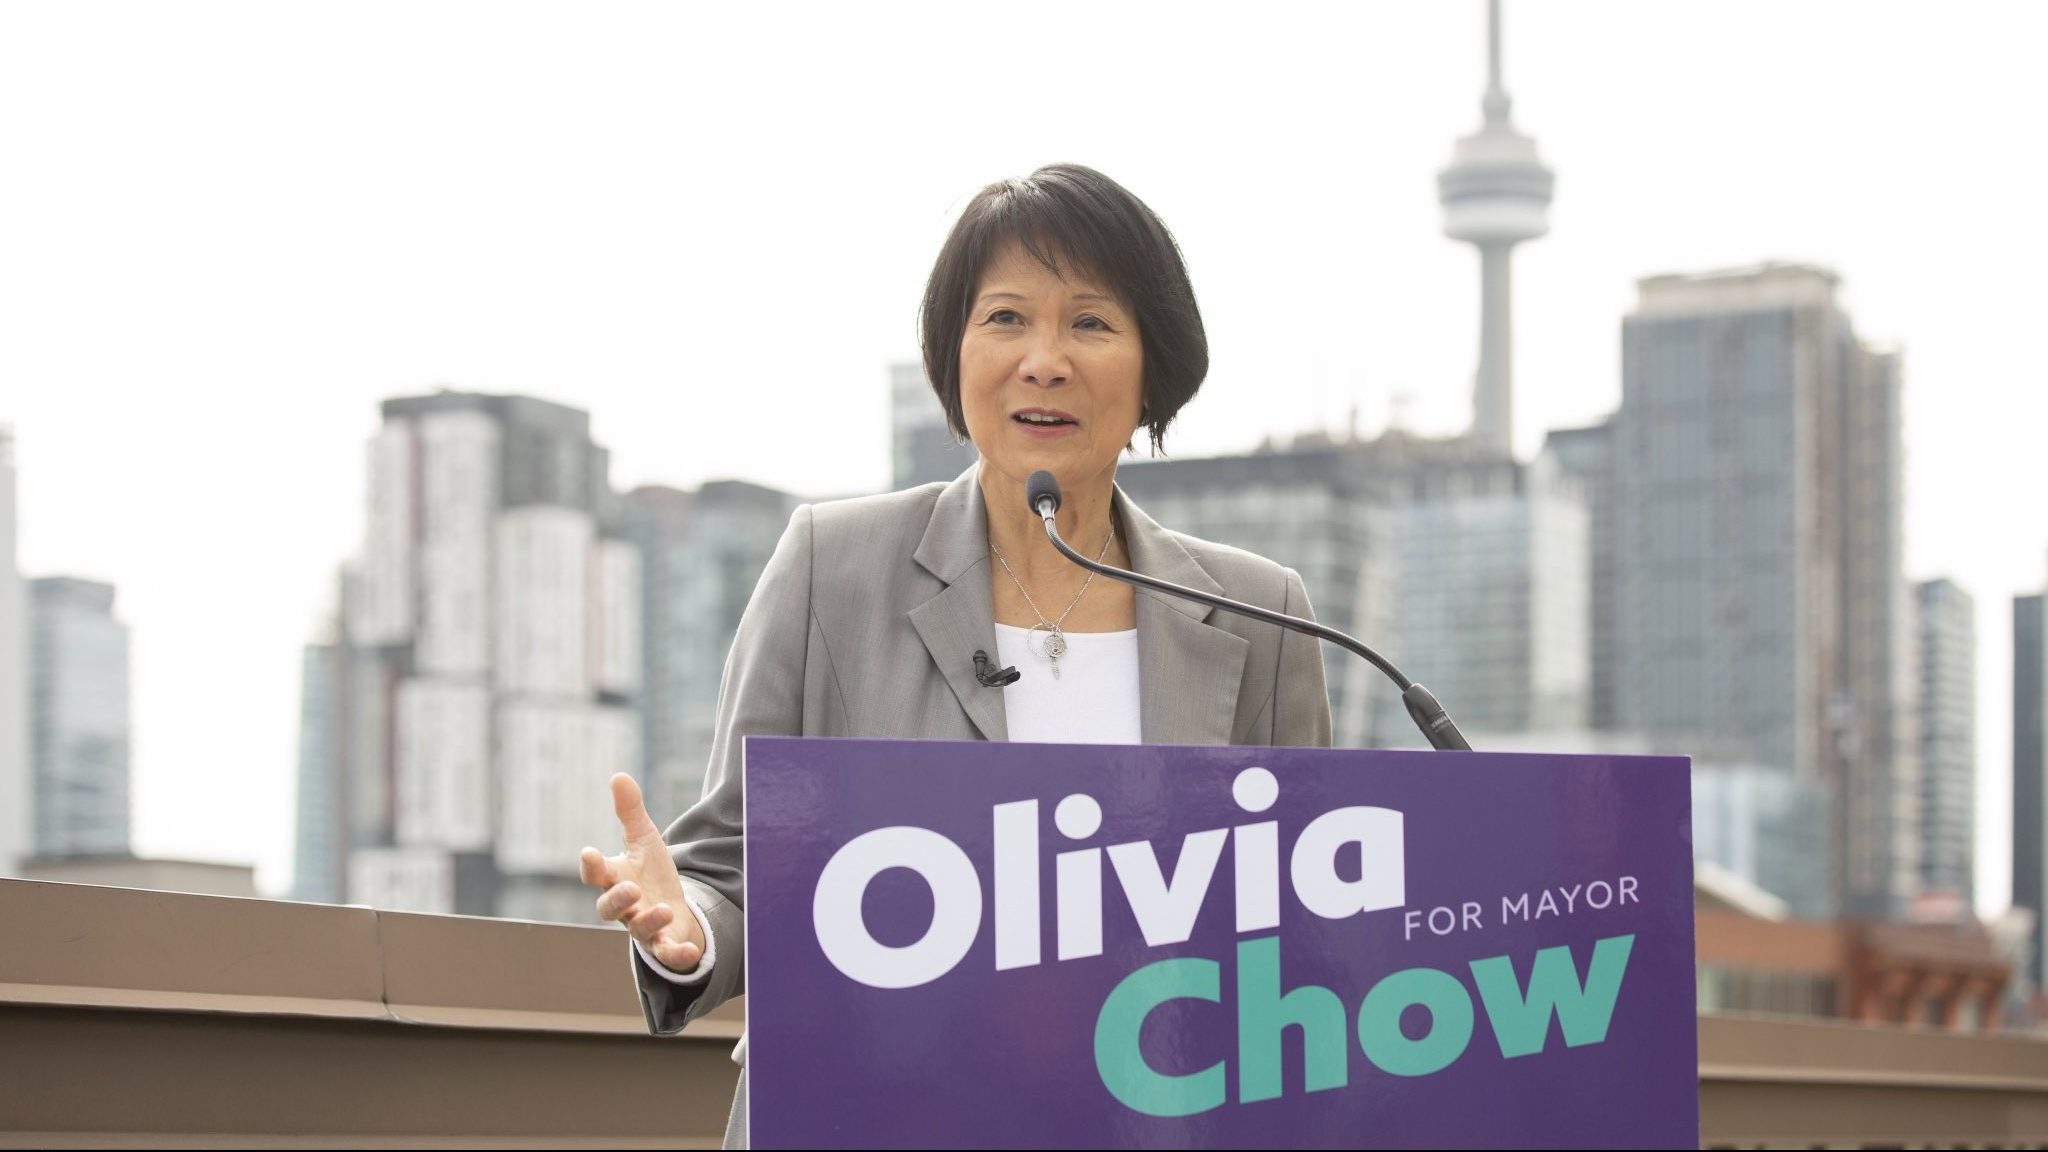 Olivia Chow, Ana Bailão gaining support in Toronto mayoral race poll